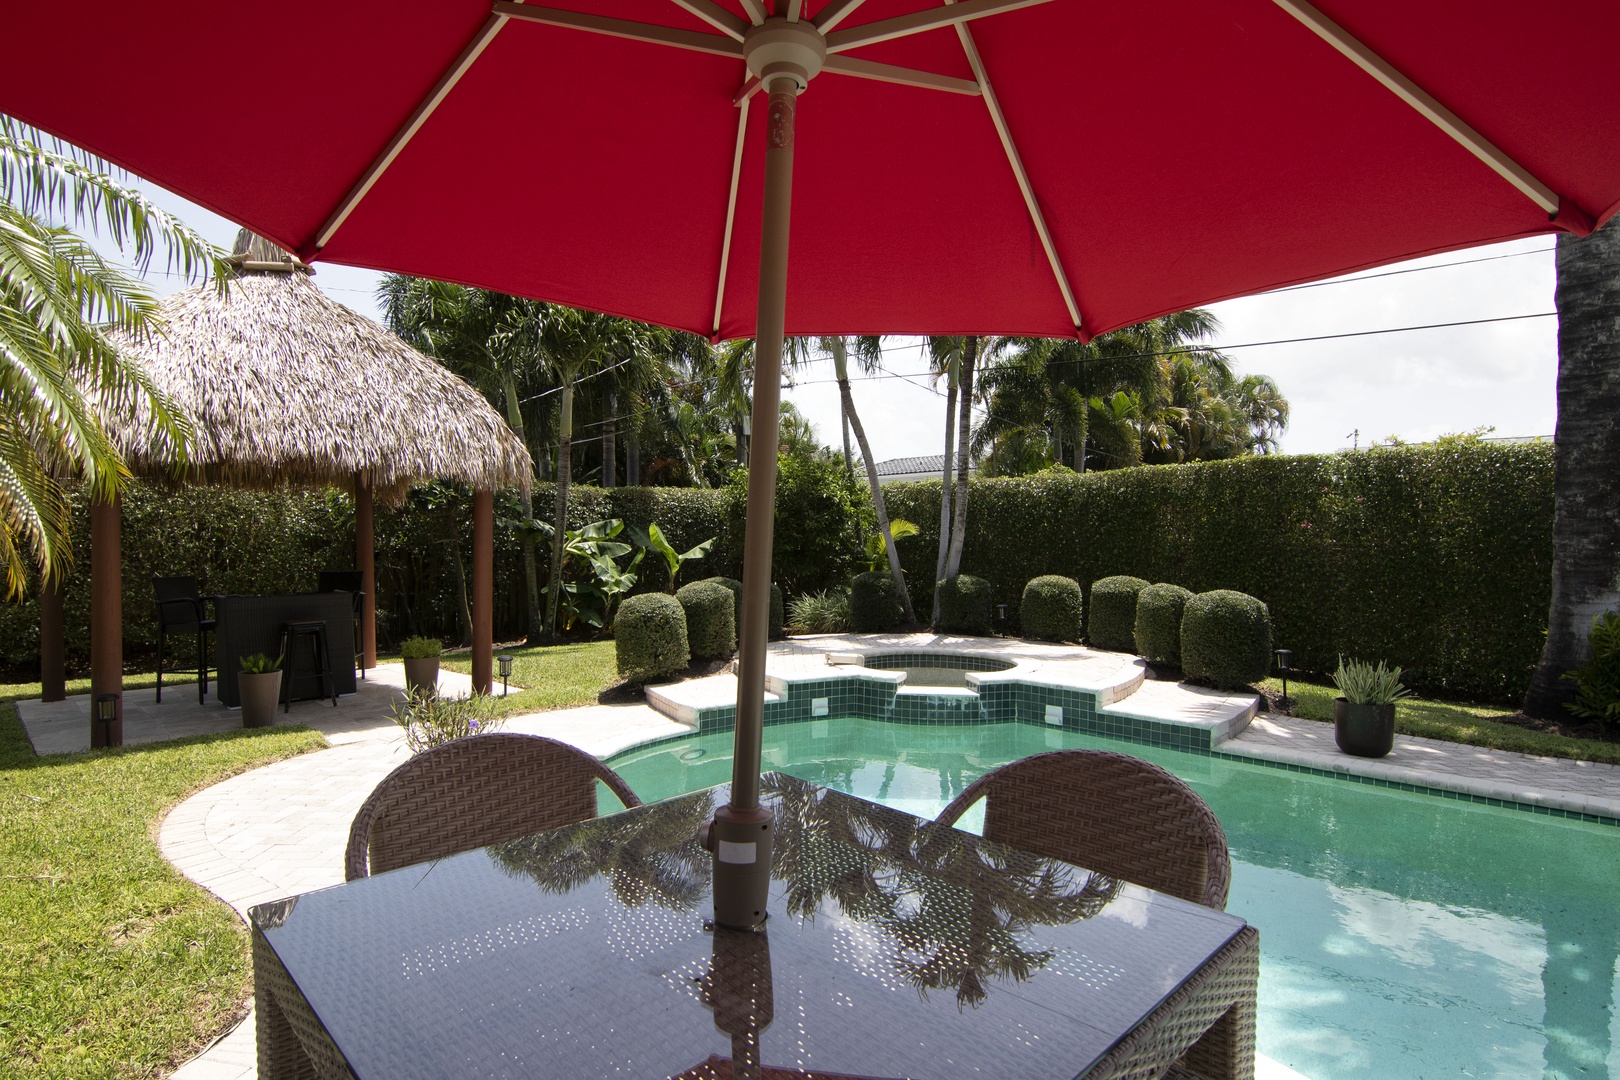 Ample outdoor dining with seating by the pool